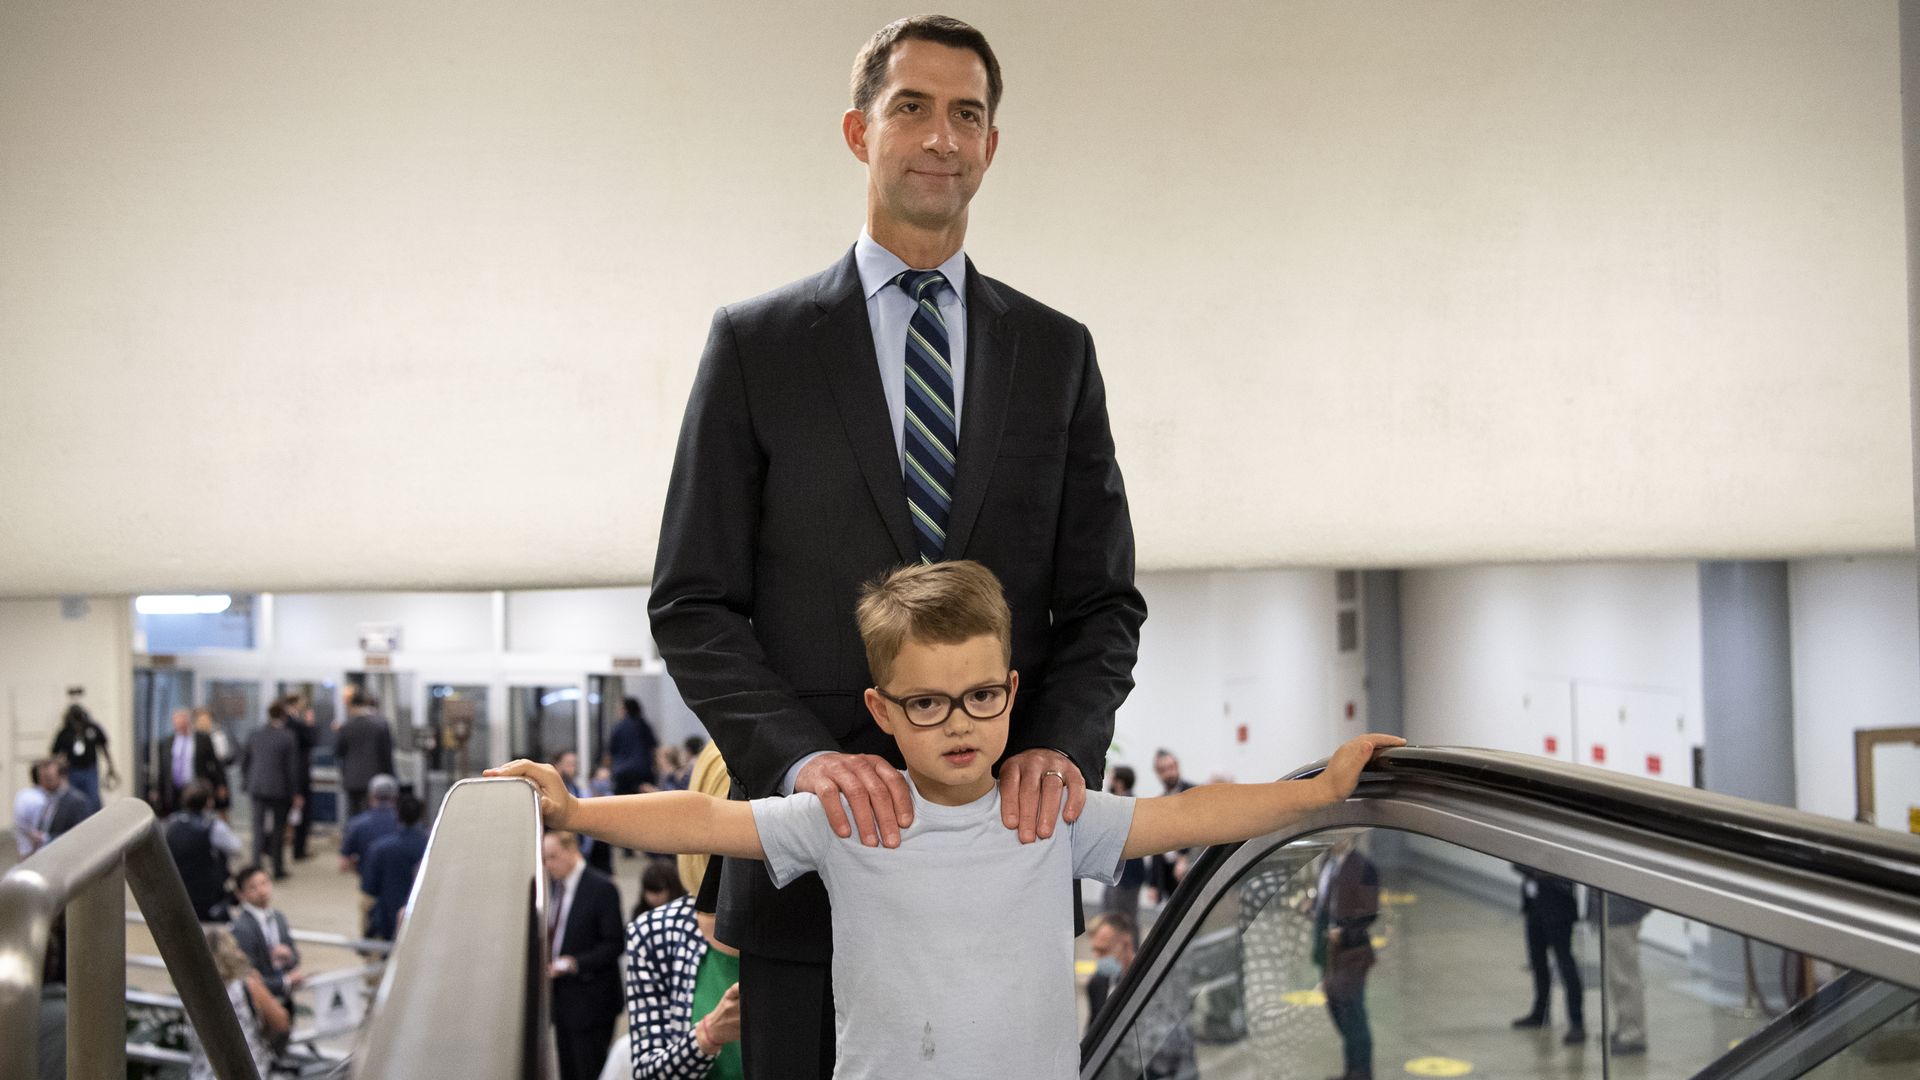 Sen. Tom Cotton is seen holding his son Daniel as they arrive at the U.S. Capitol.